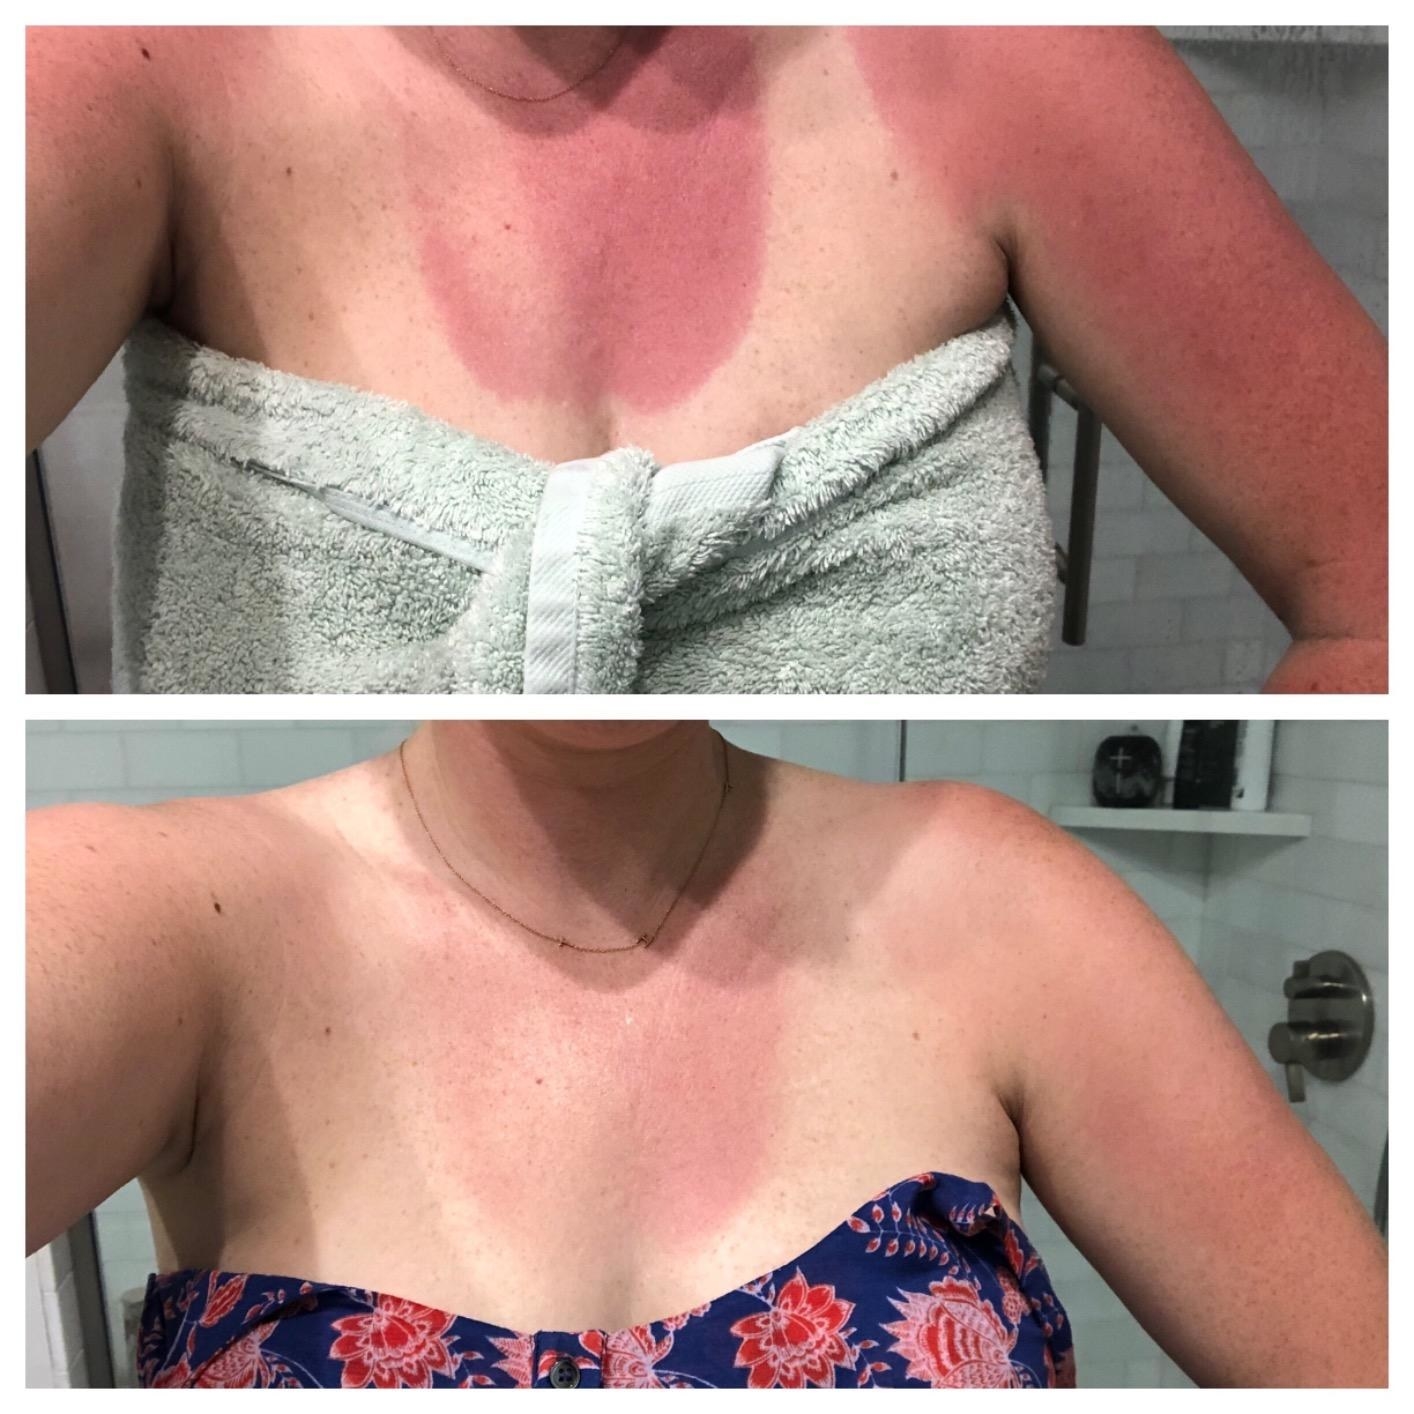 Reviewer image of their sun burn before and after using the cream